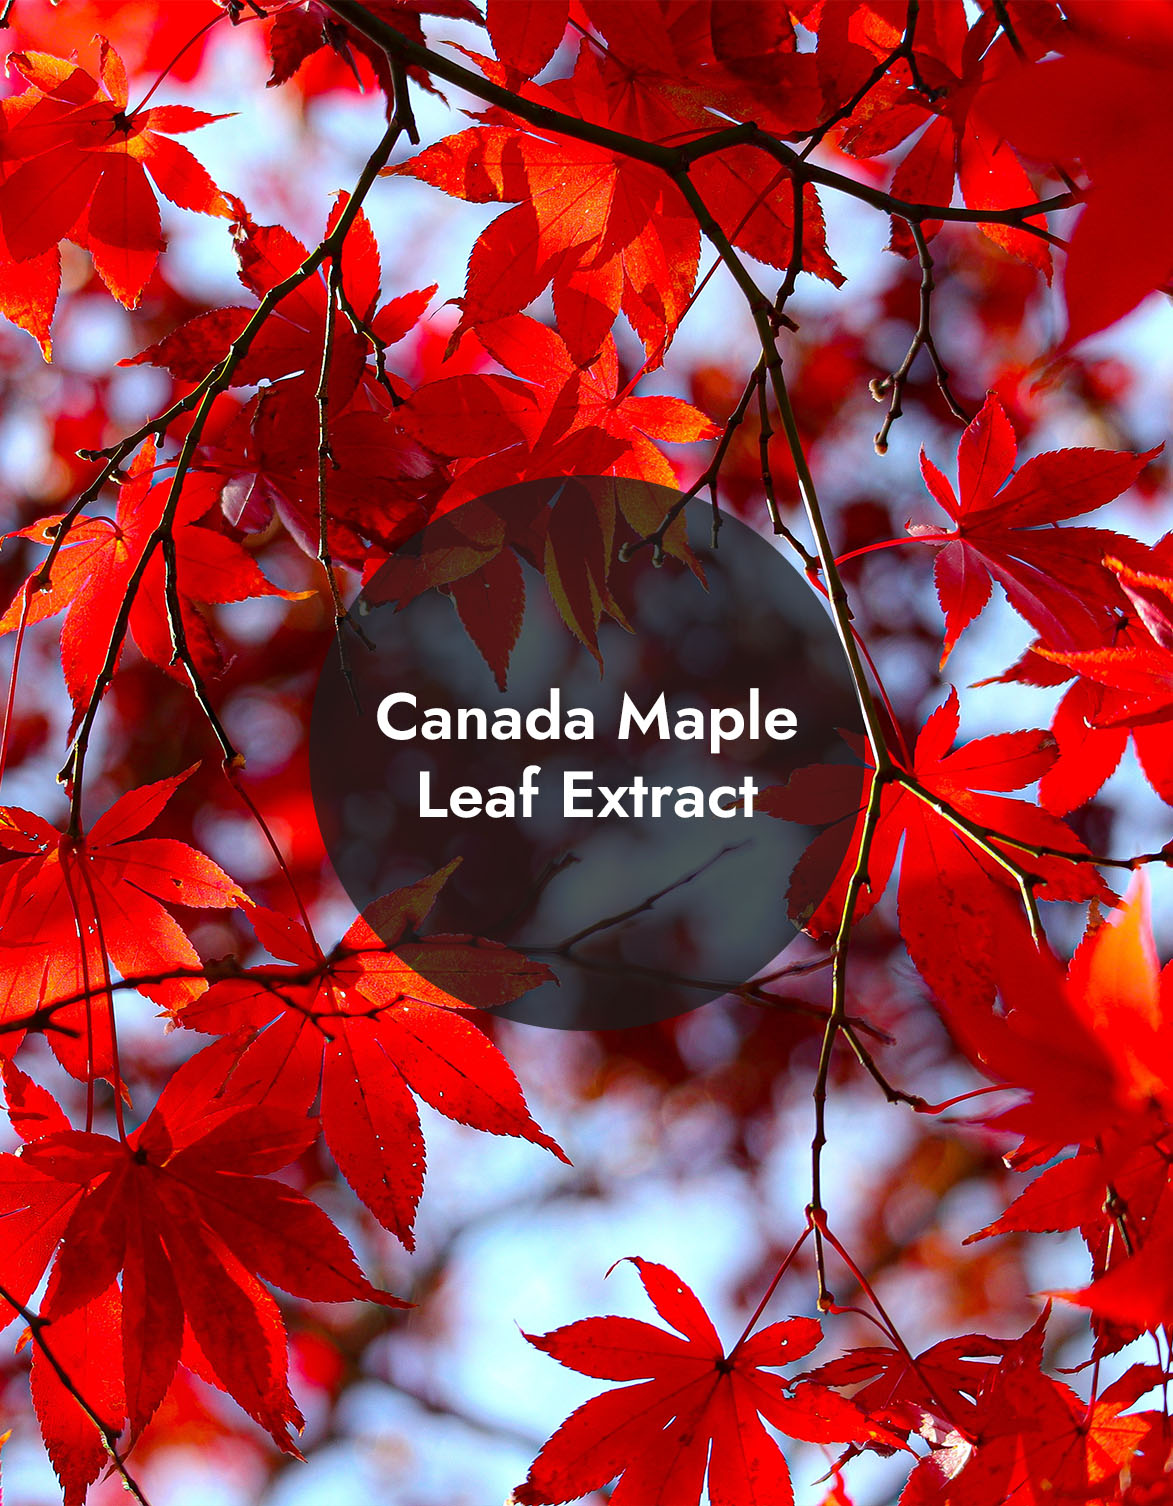 Canada Maple Leaf Extract